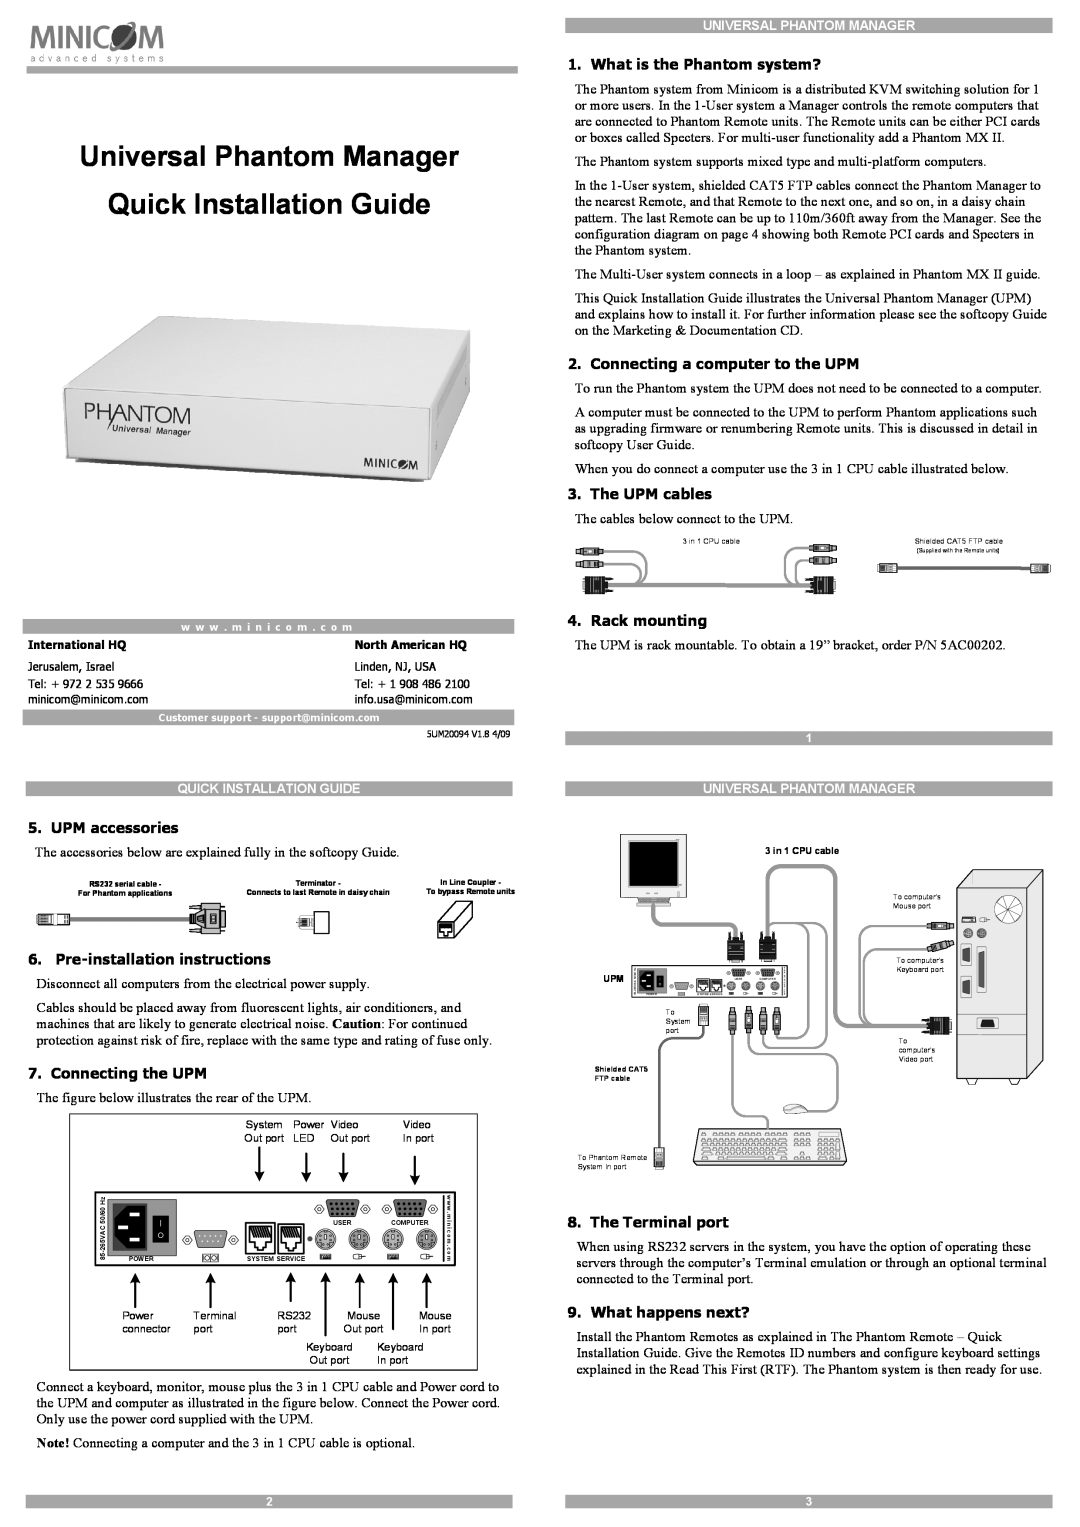 Minicom Advanced Systems 5UM20094 installation instructions UPM accessories, What is the Phantom system?, The UPM cables 